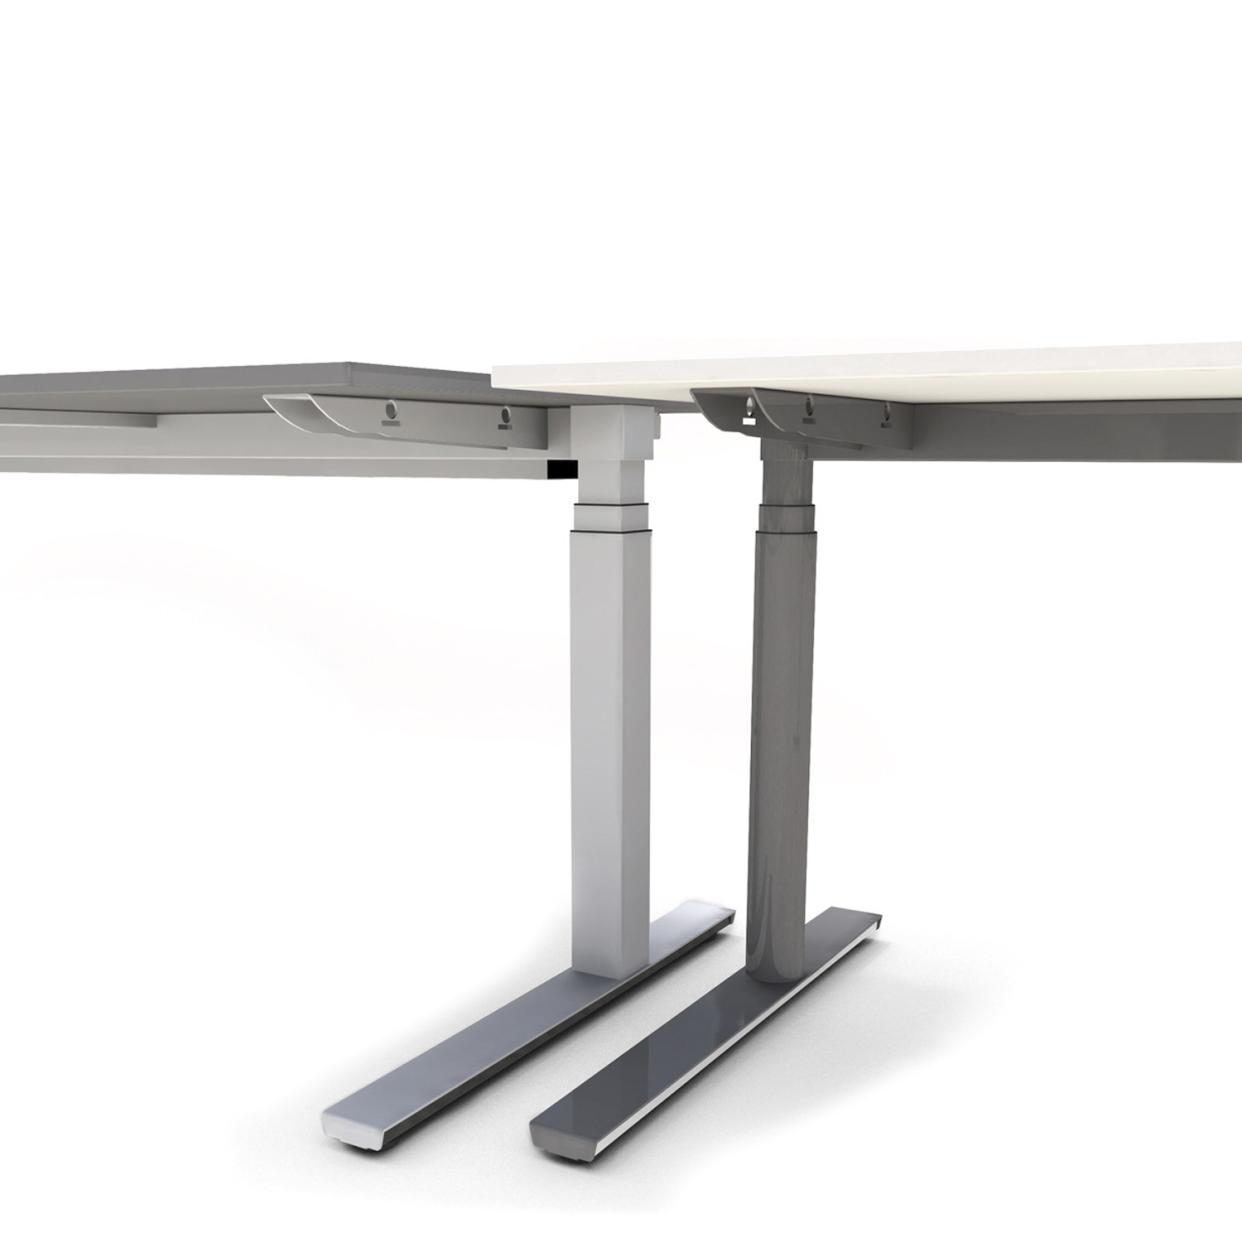 What Are the Benefits of Using an Electric Height Adjustable Desk?